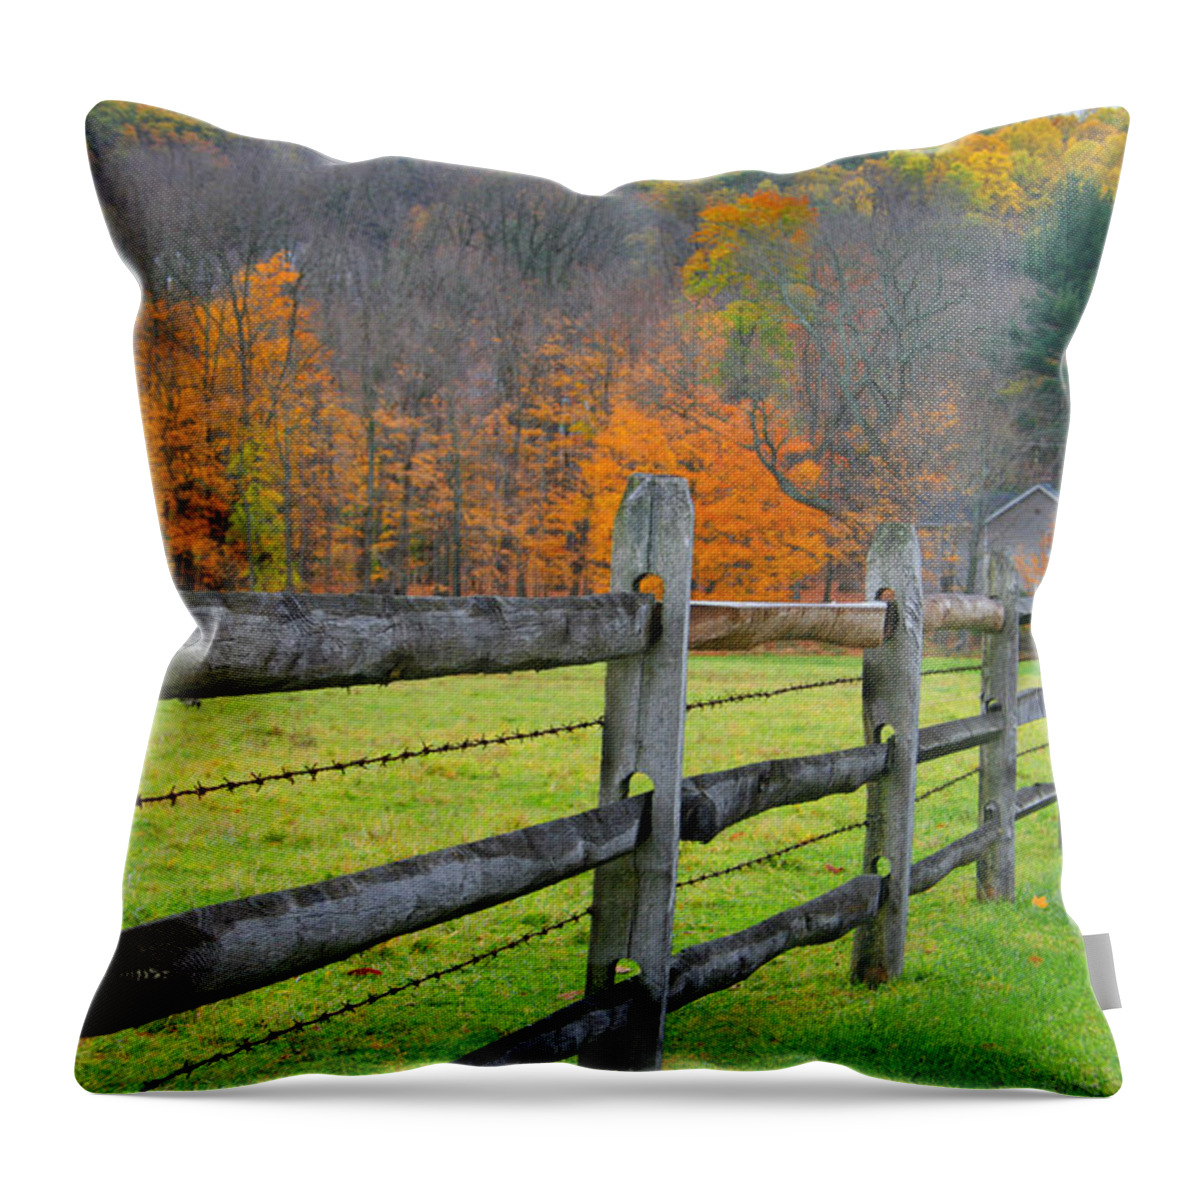 Landscapes Throw Pillow featuring the photograph Turning Trees by Barbara Northrup